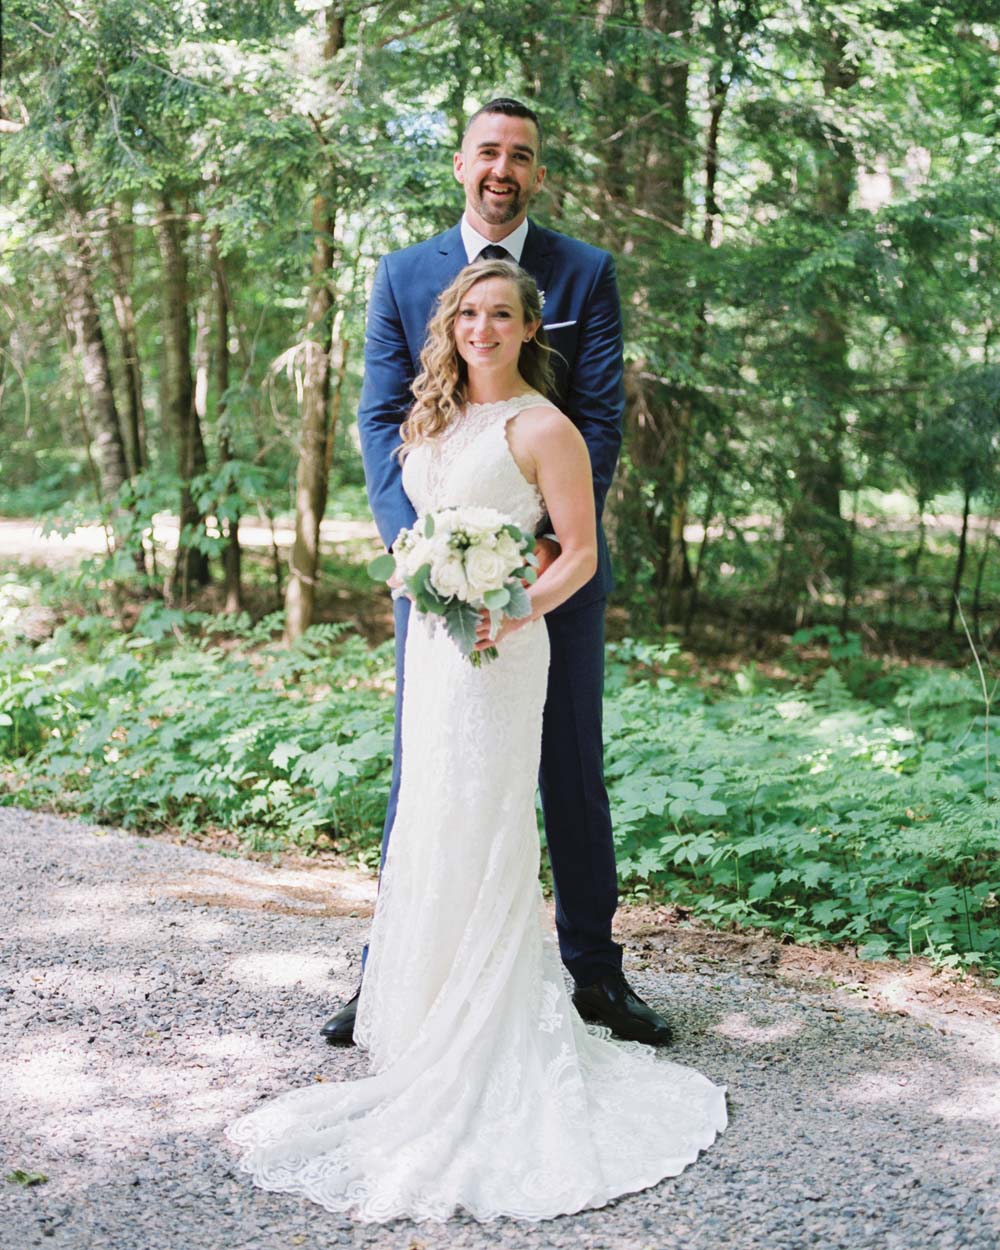 Olympian Rosie McLennan's Cottage Escape Wedding - Bride and Groom